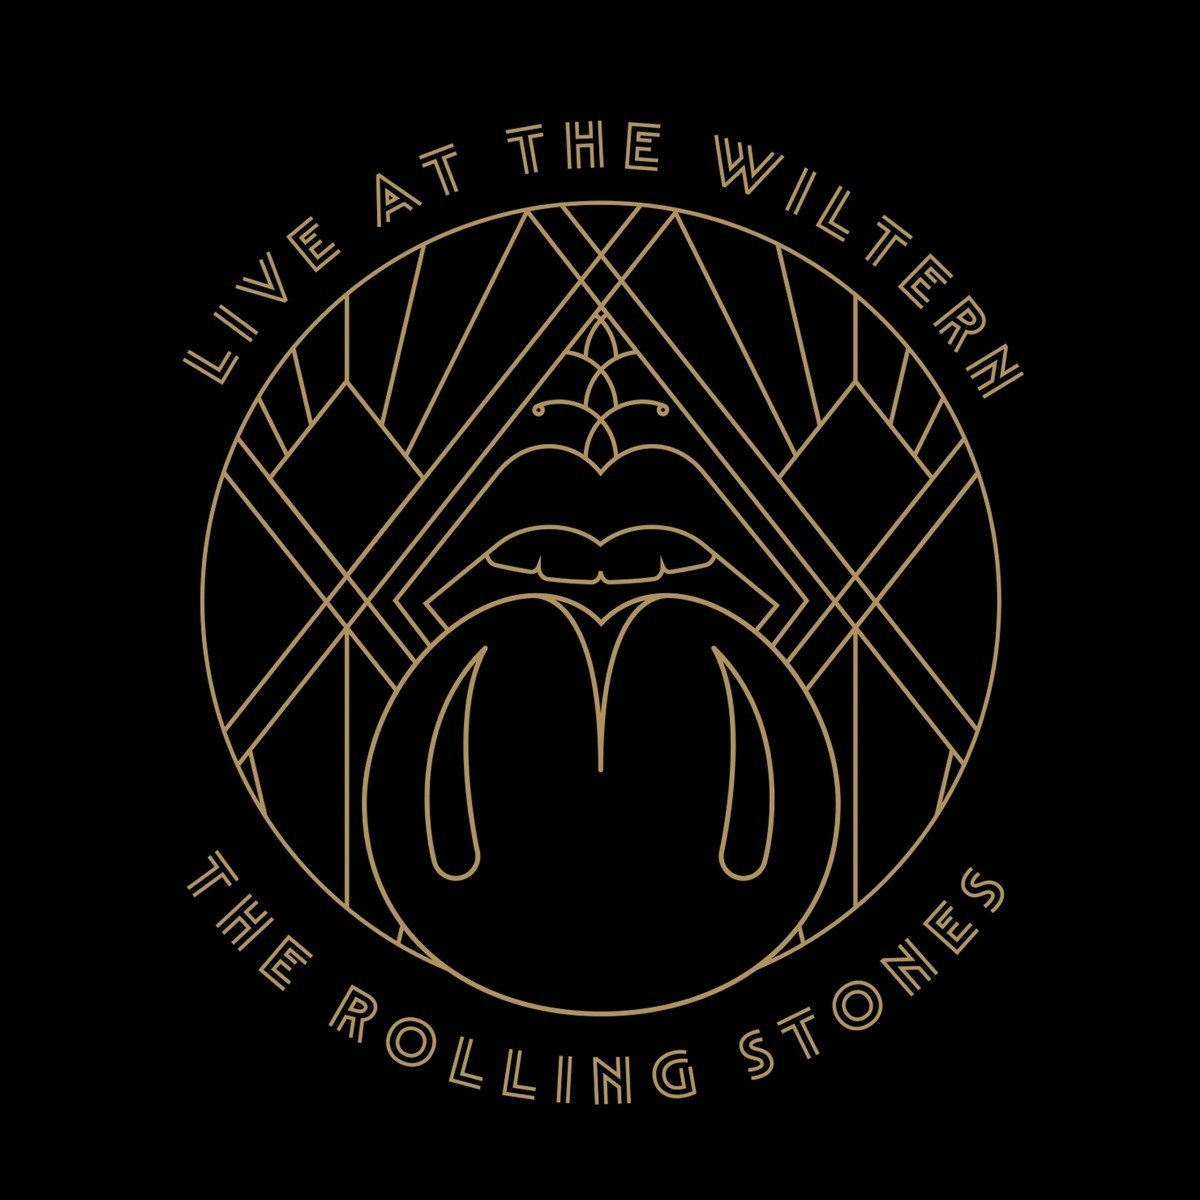 LIVE AT THE WILTERN - 3LP